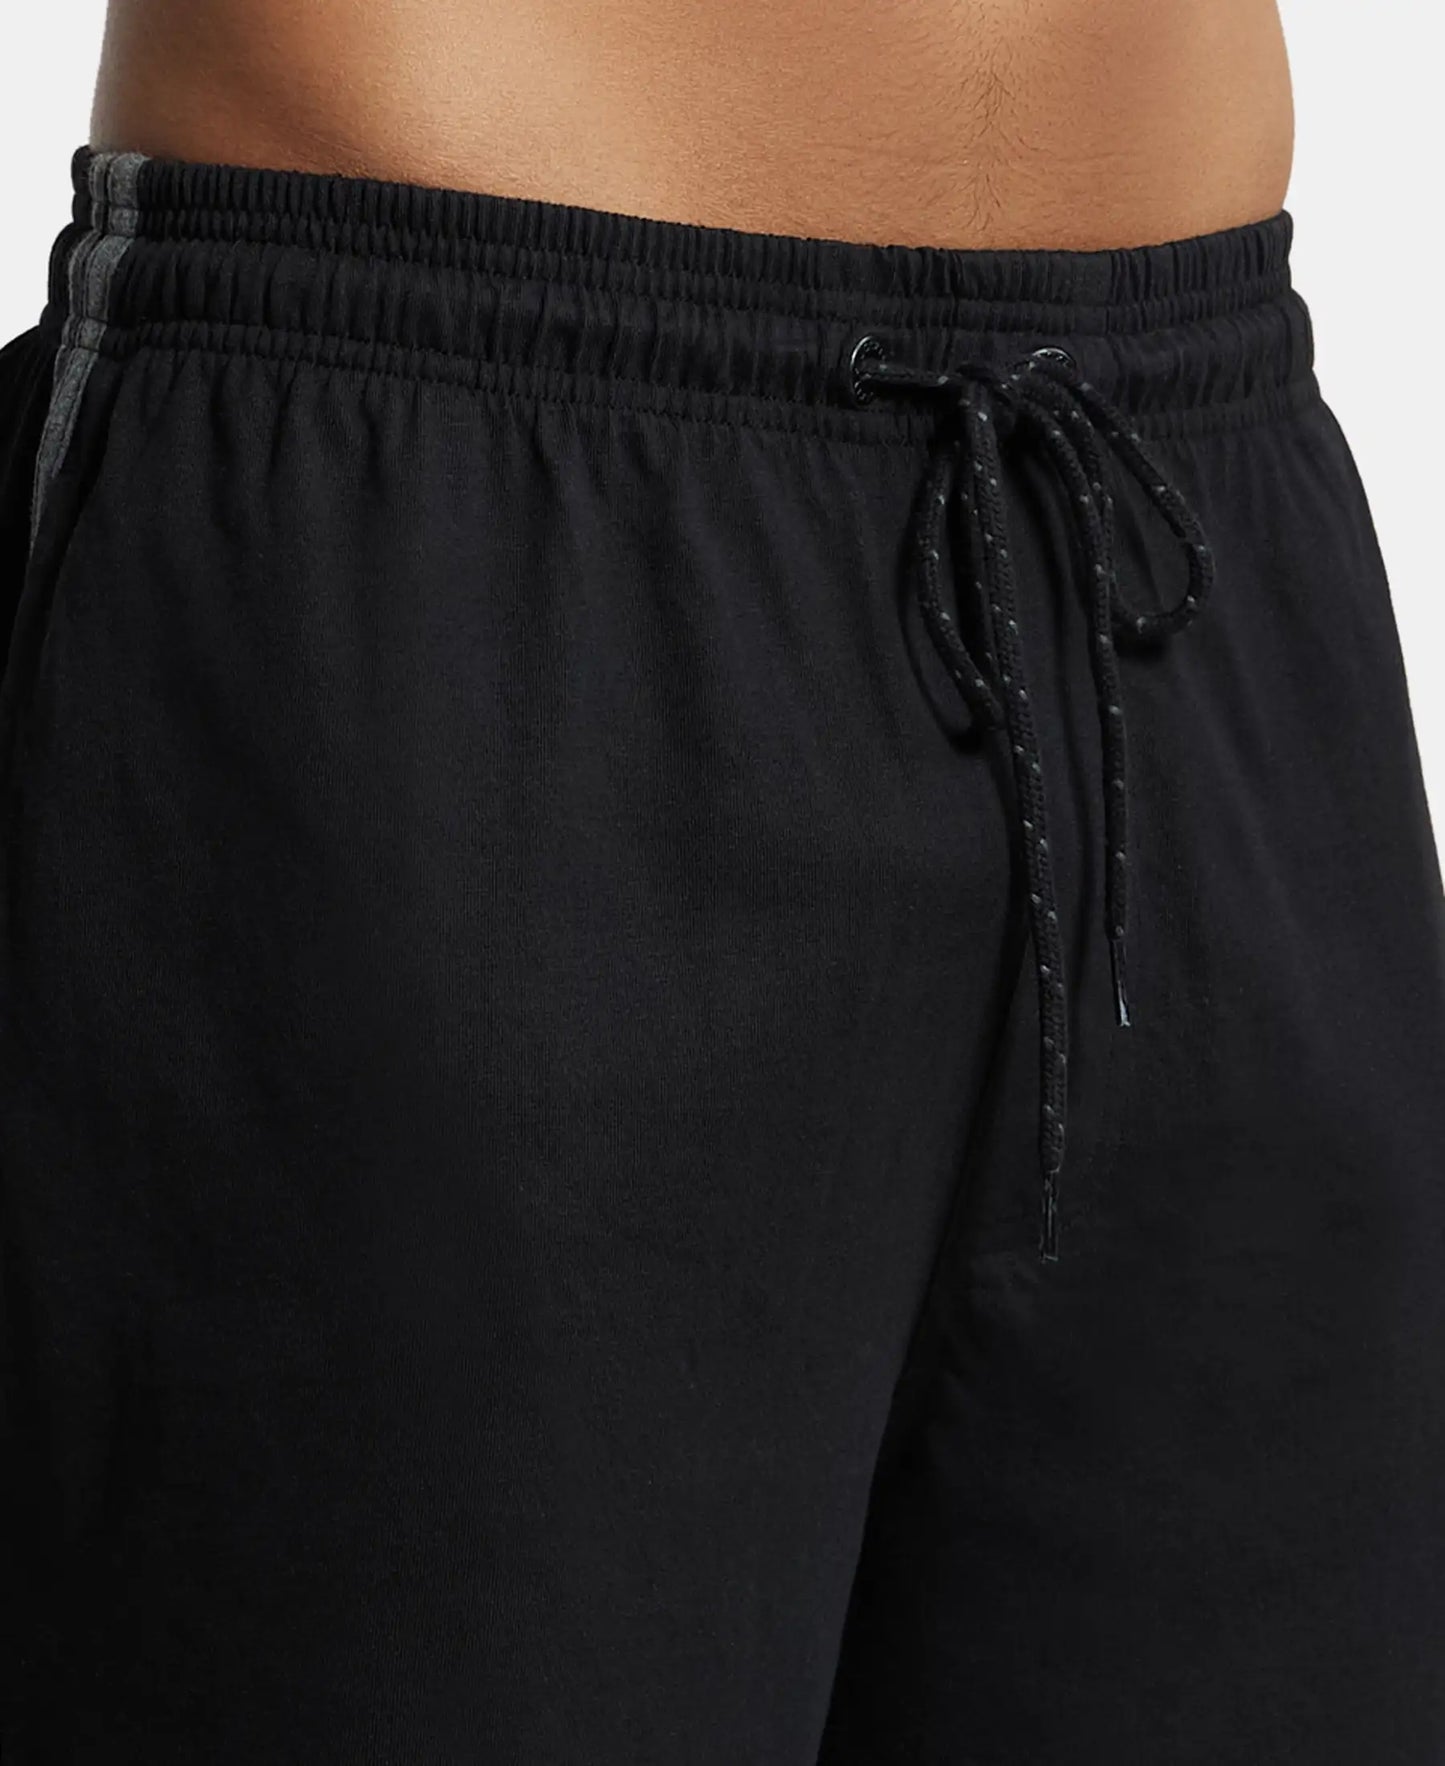 Super Combed Cotton Rich Regular Fit Shorts with Side Pockets - Black-6